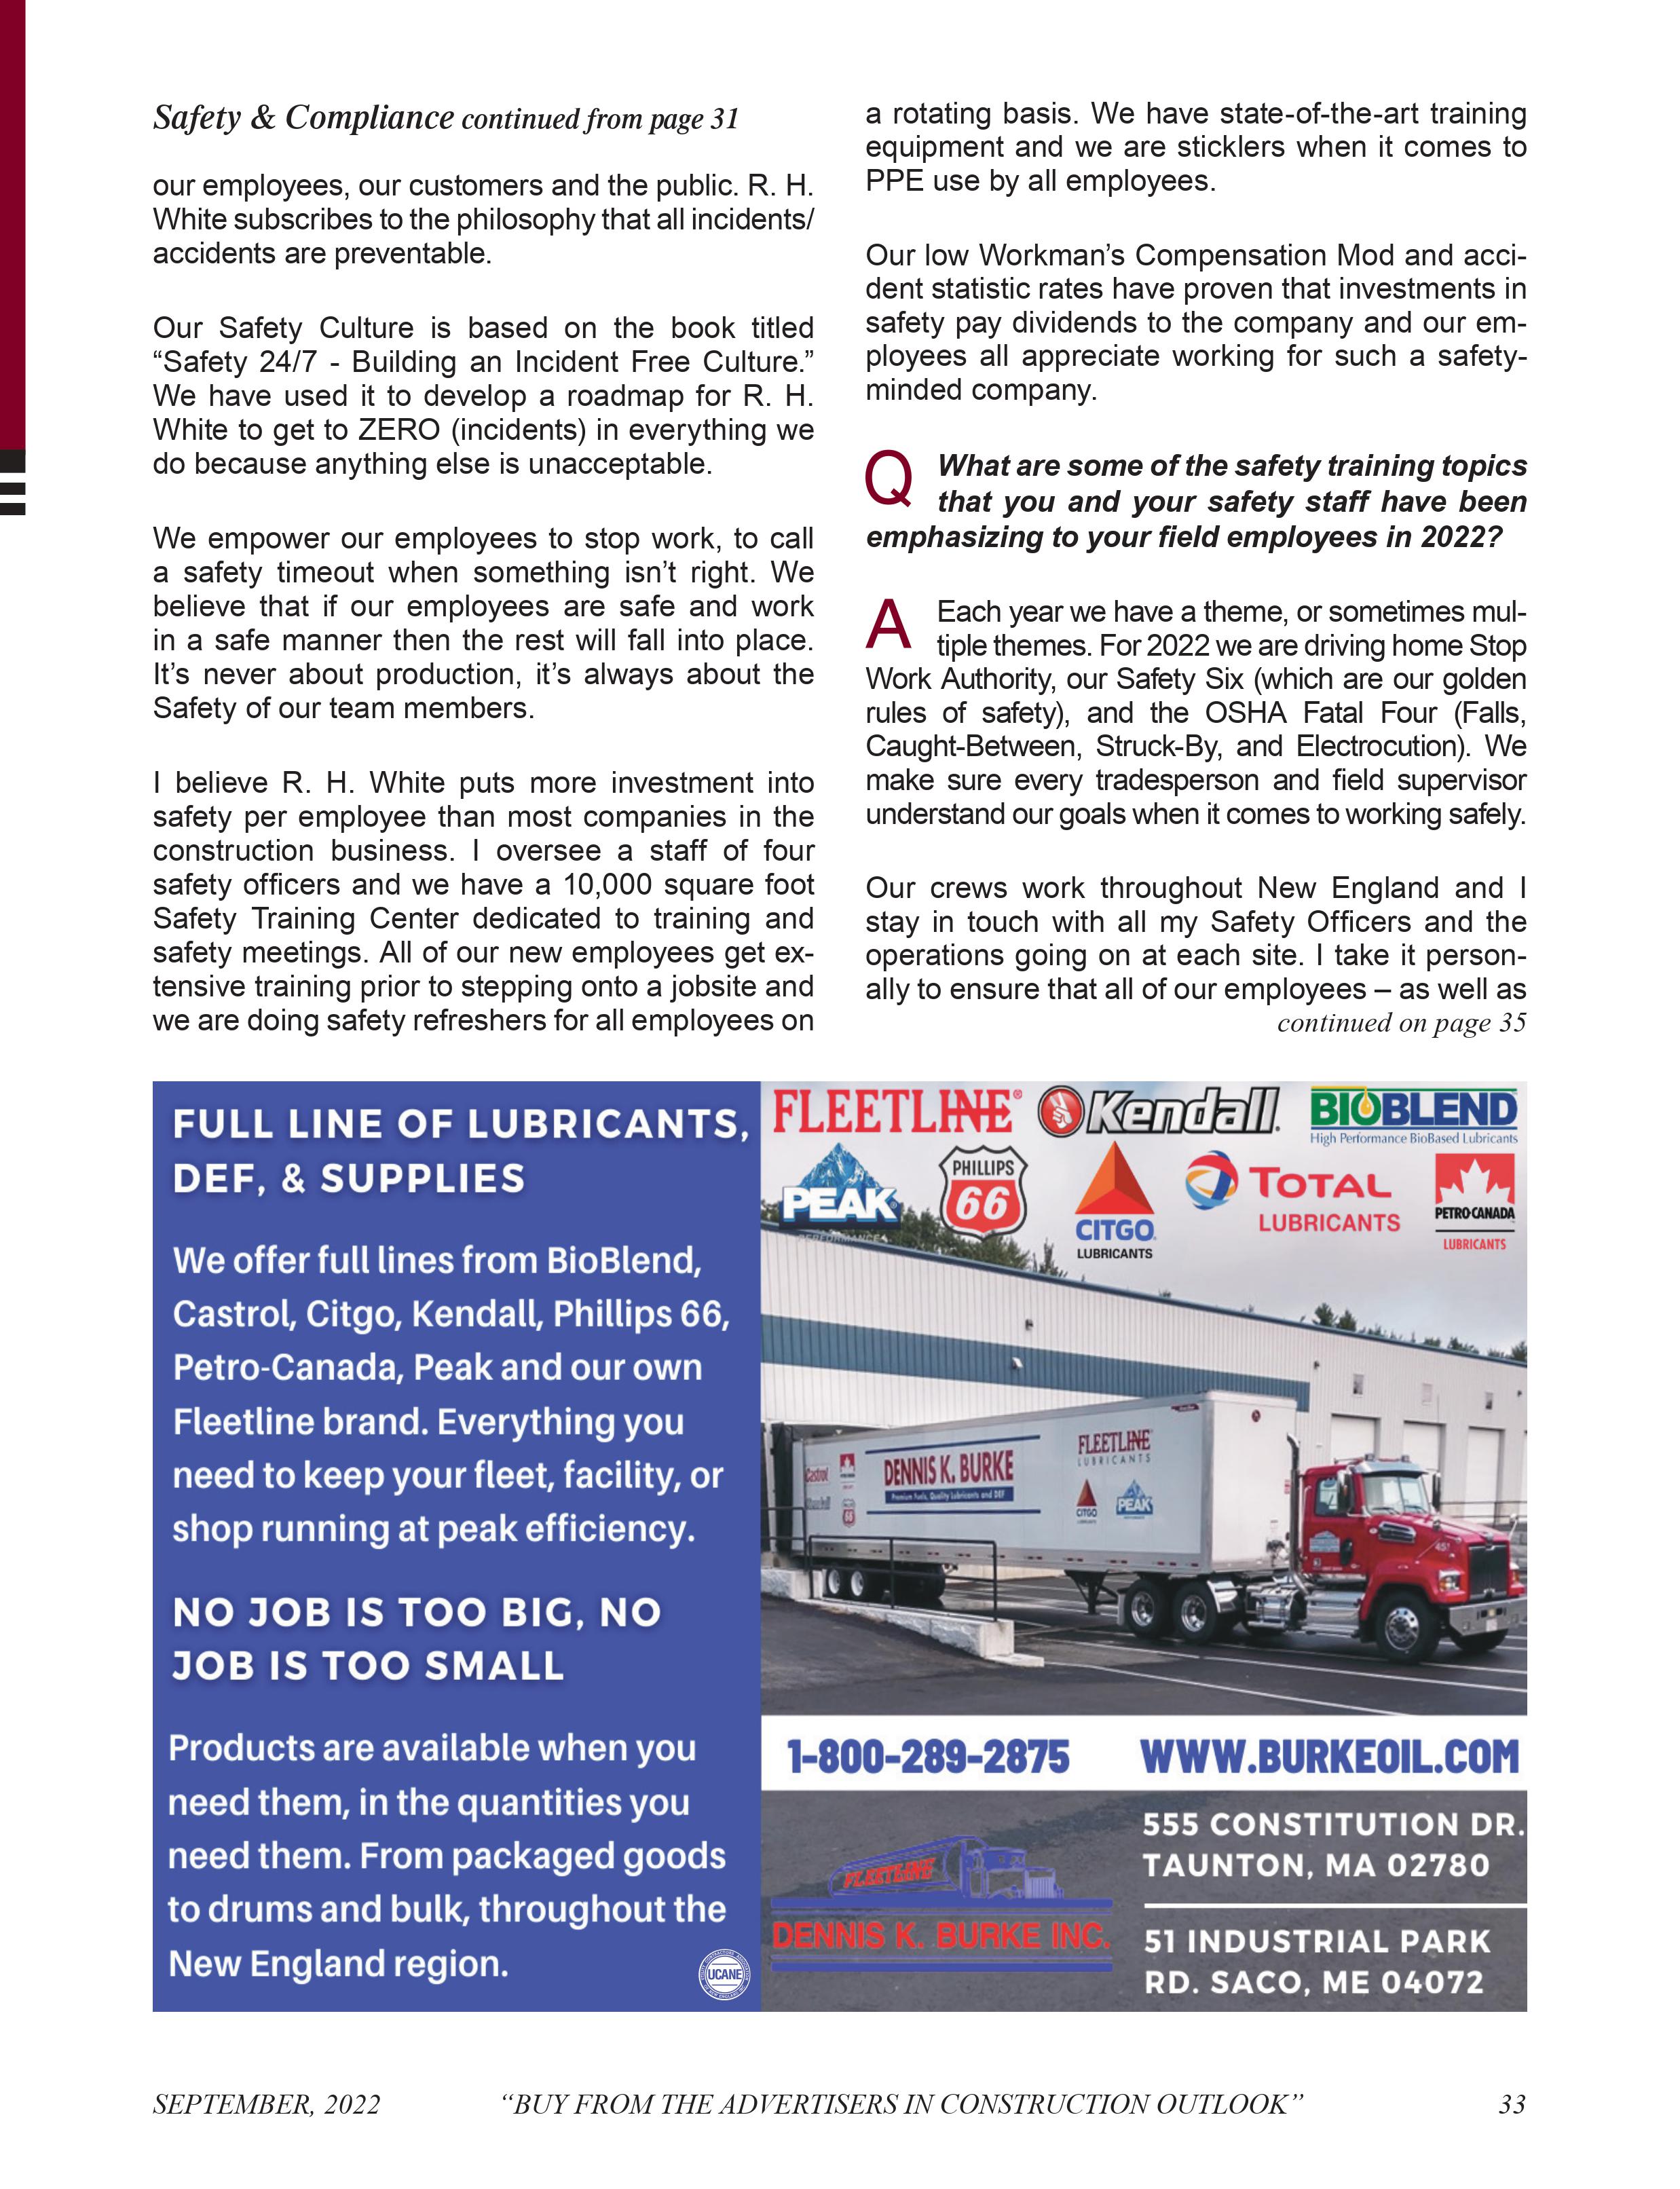 Construction Safety & Compliance: An Interview with Rich Denham Page 2